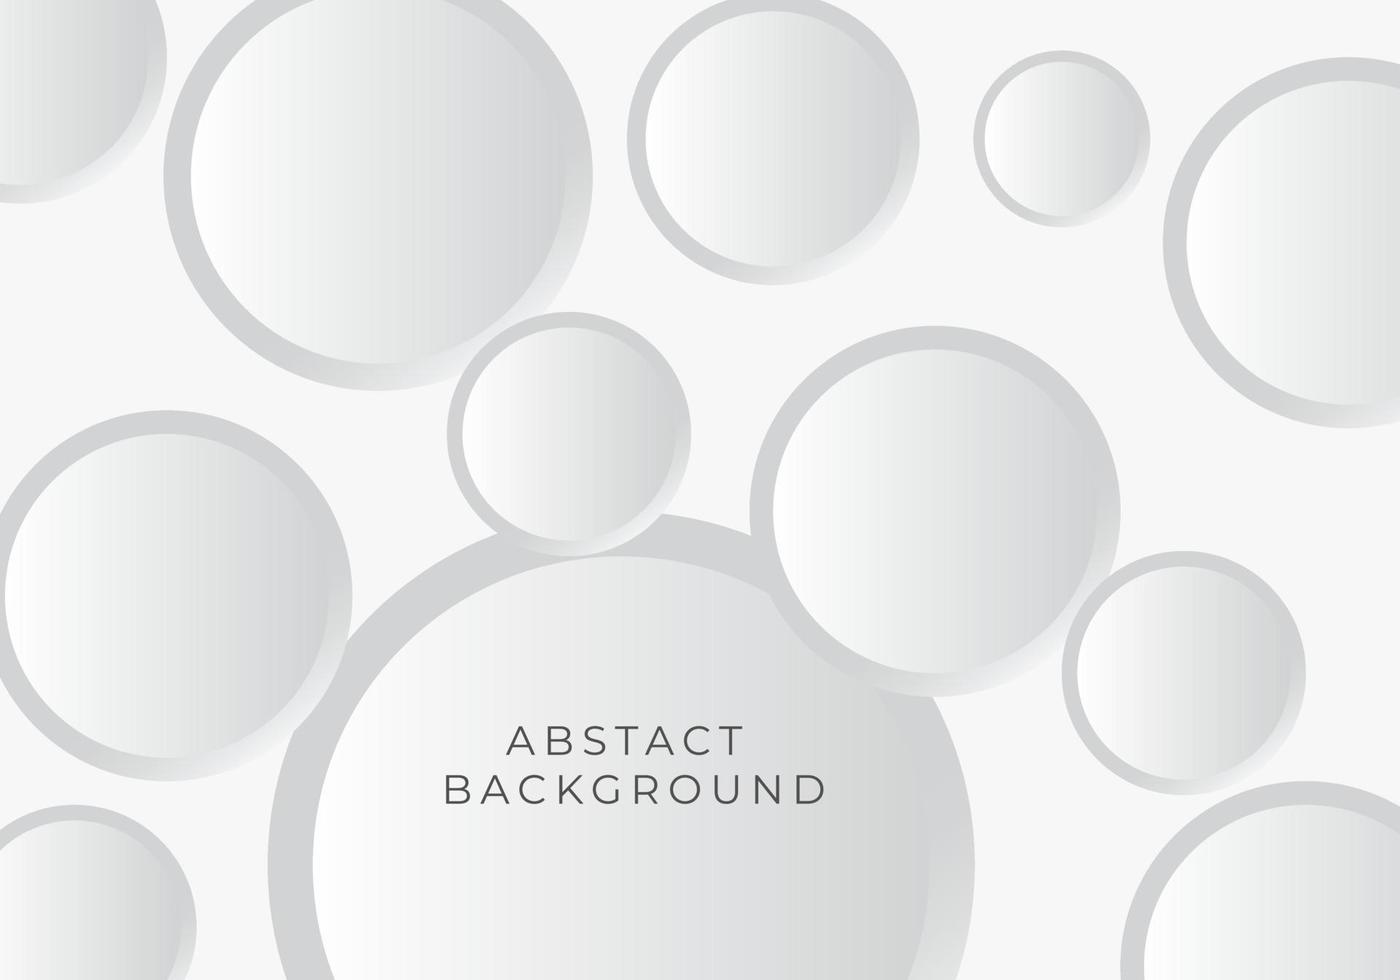 abstract white and gray color background ilustration.abstract gray background vector